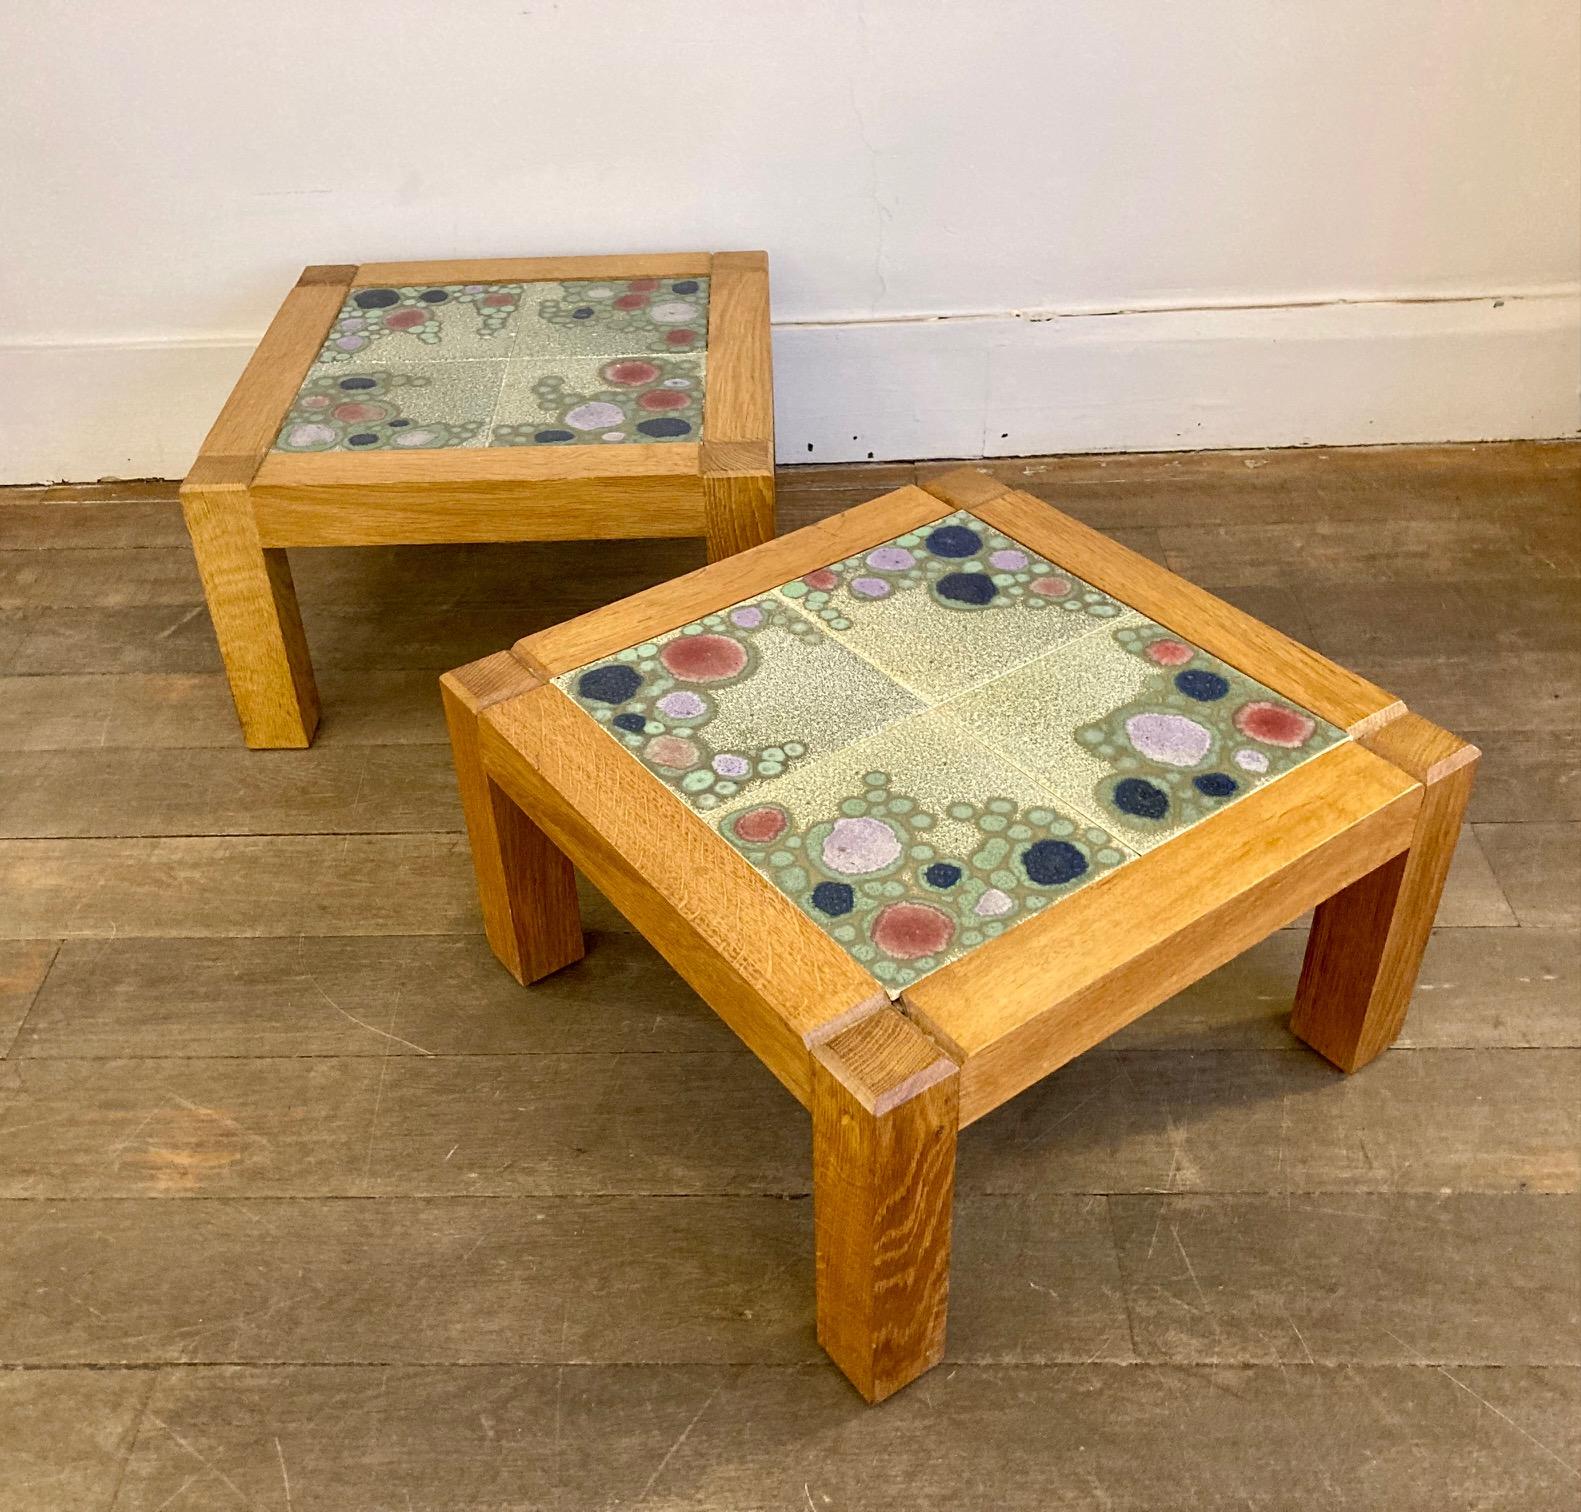 A pair of small side tables designed by Robert Guillerme et Jacques Chambron. 

The tables are made of solid oak.

the tables tops are decorated with ceramic tiles by DANIKOWSKI.

One table is stamped 